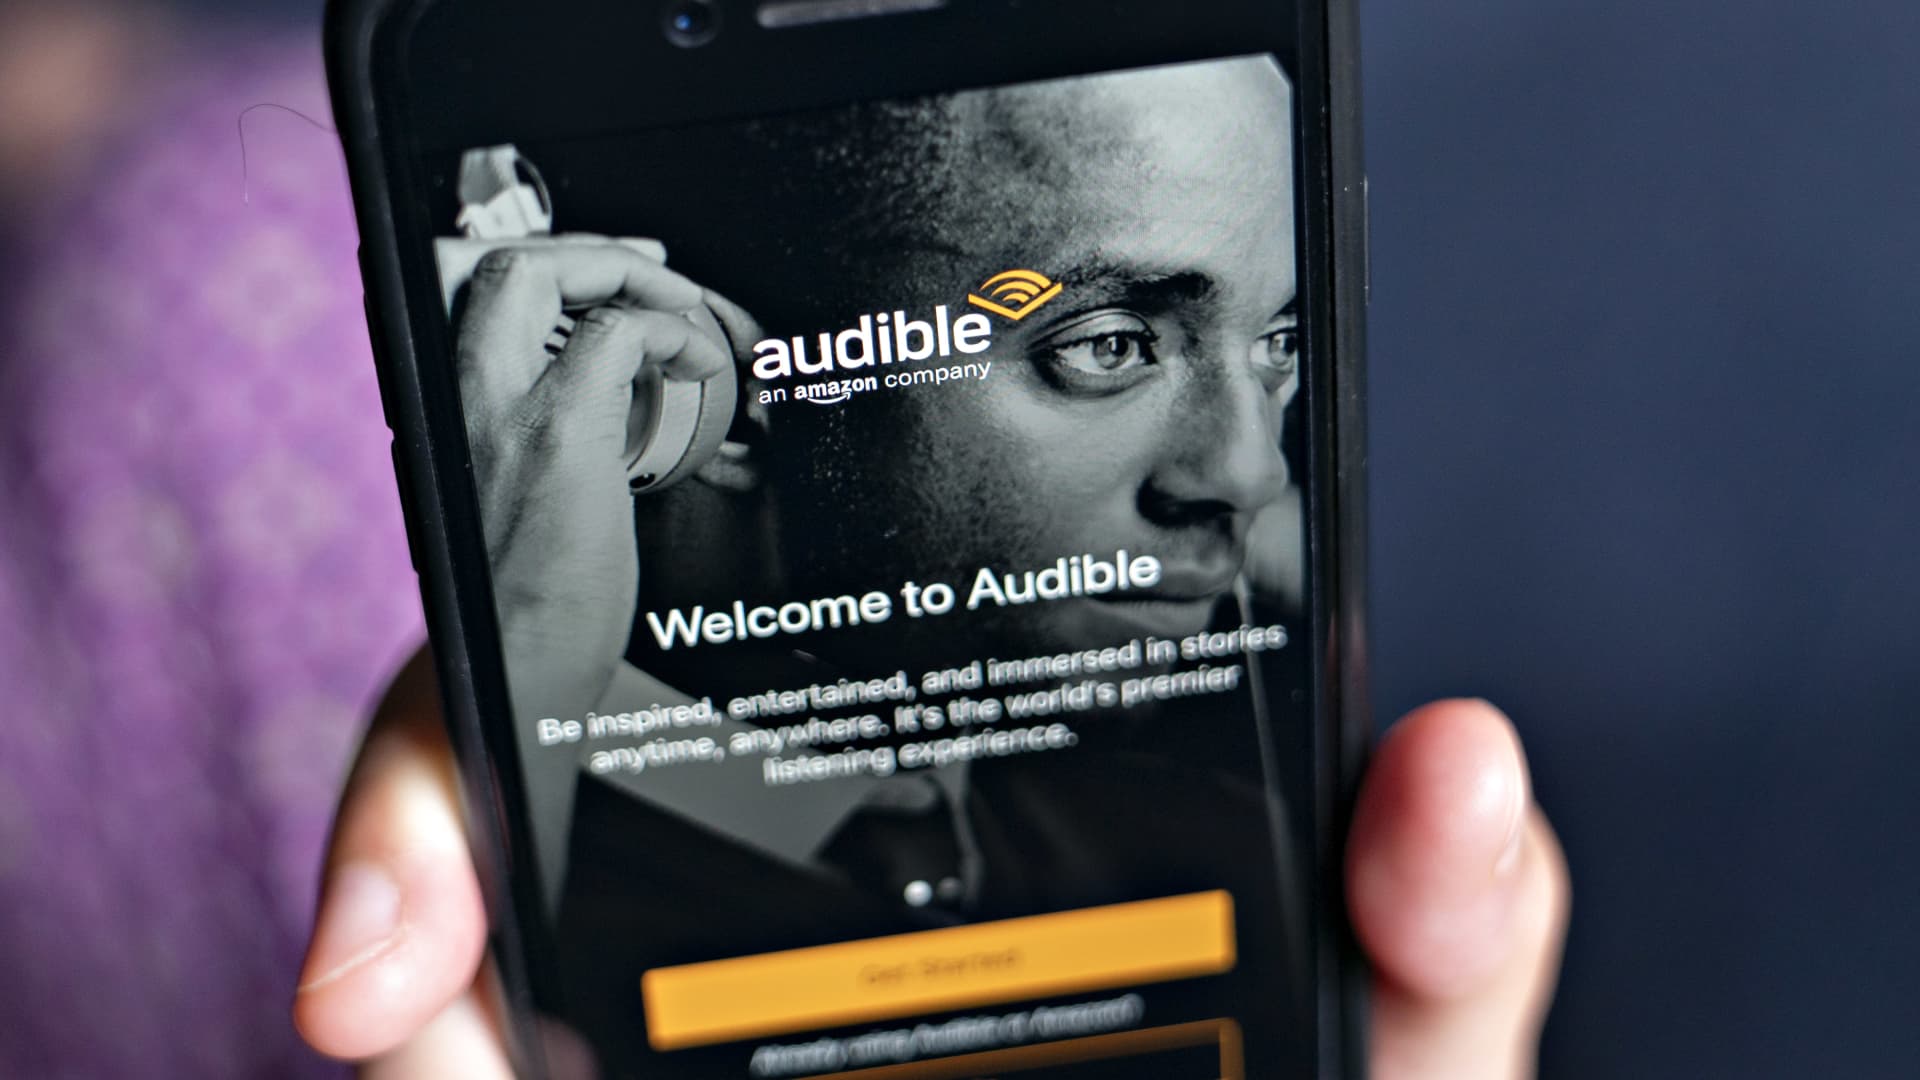 Amazon's Audible unit lays off about 5% of staff